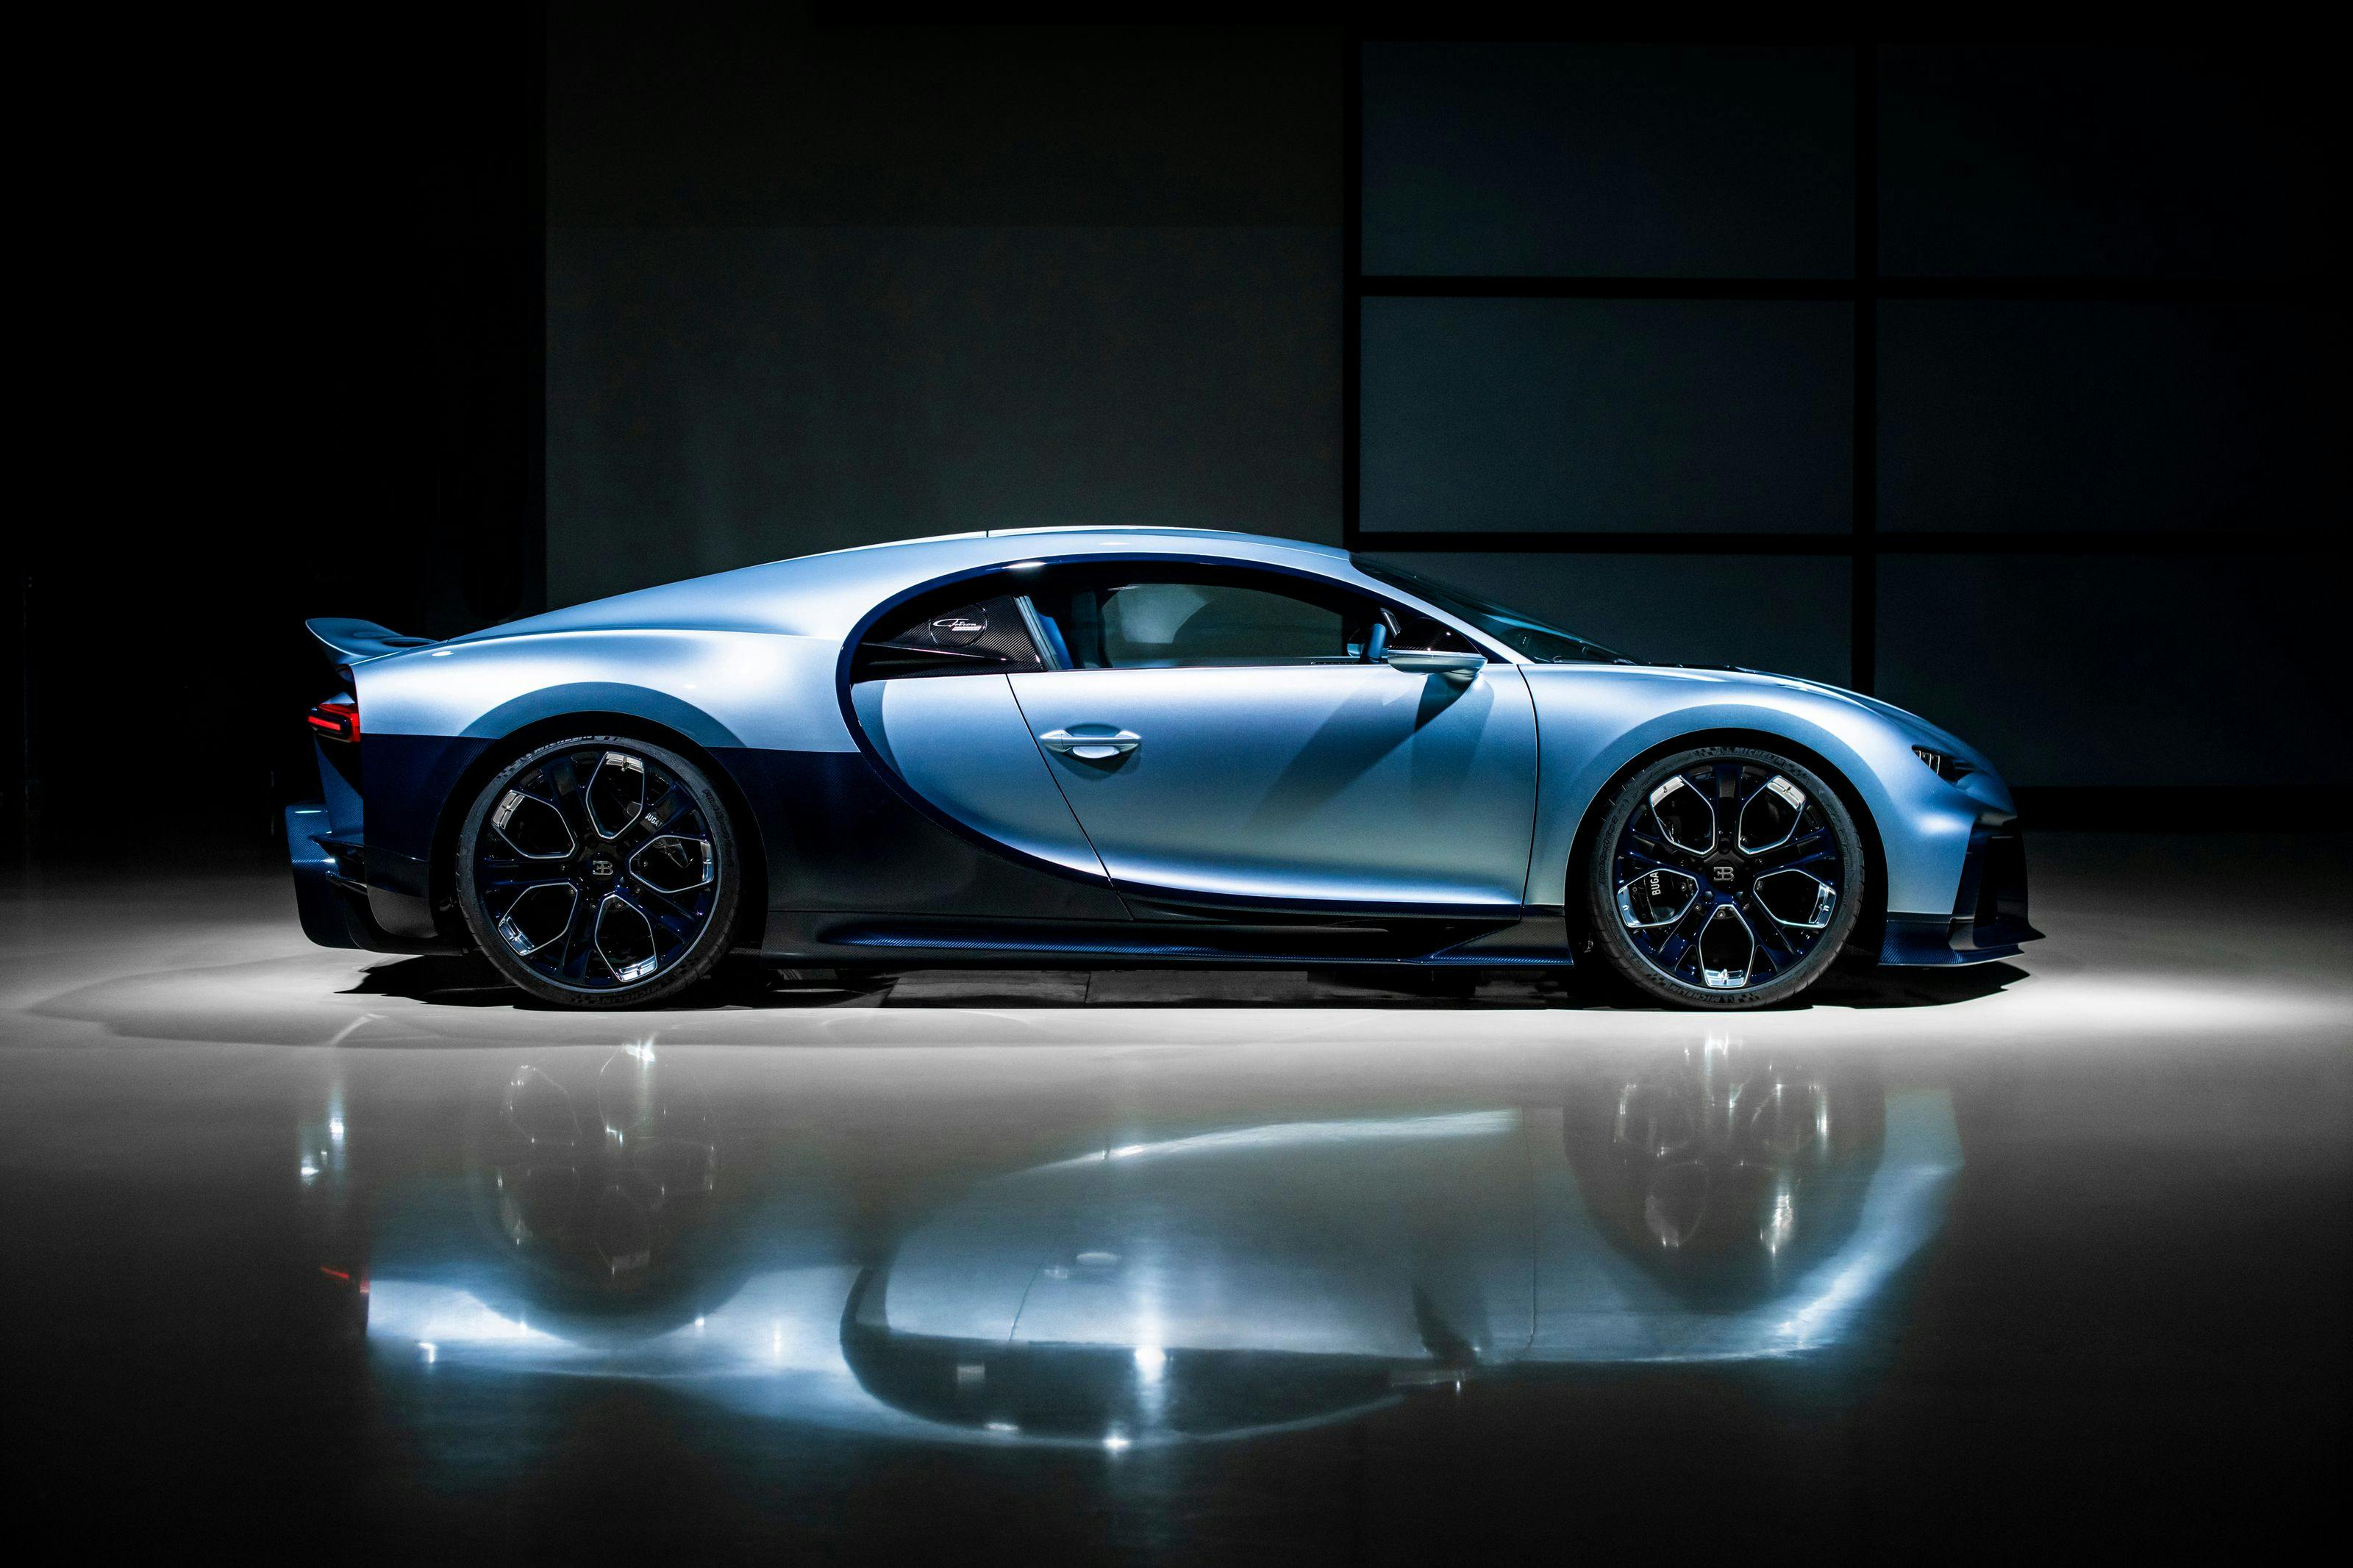 Last available Bugatti powered by the legendary W16 engine to be auctioned this week